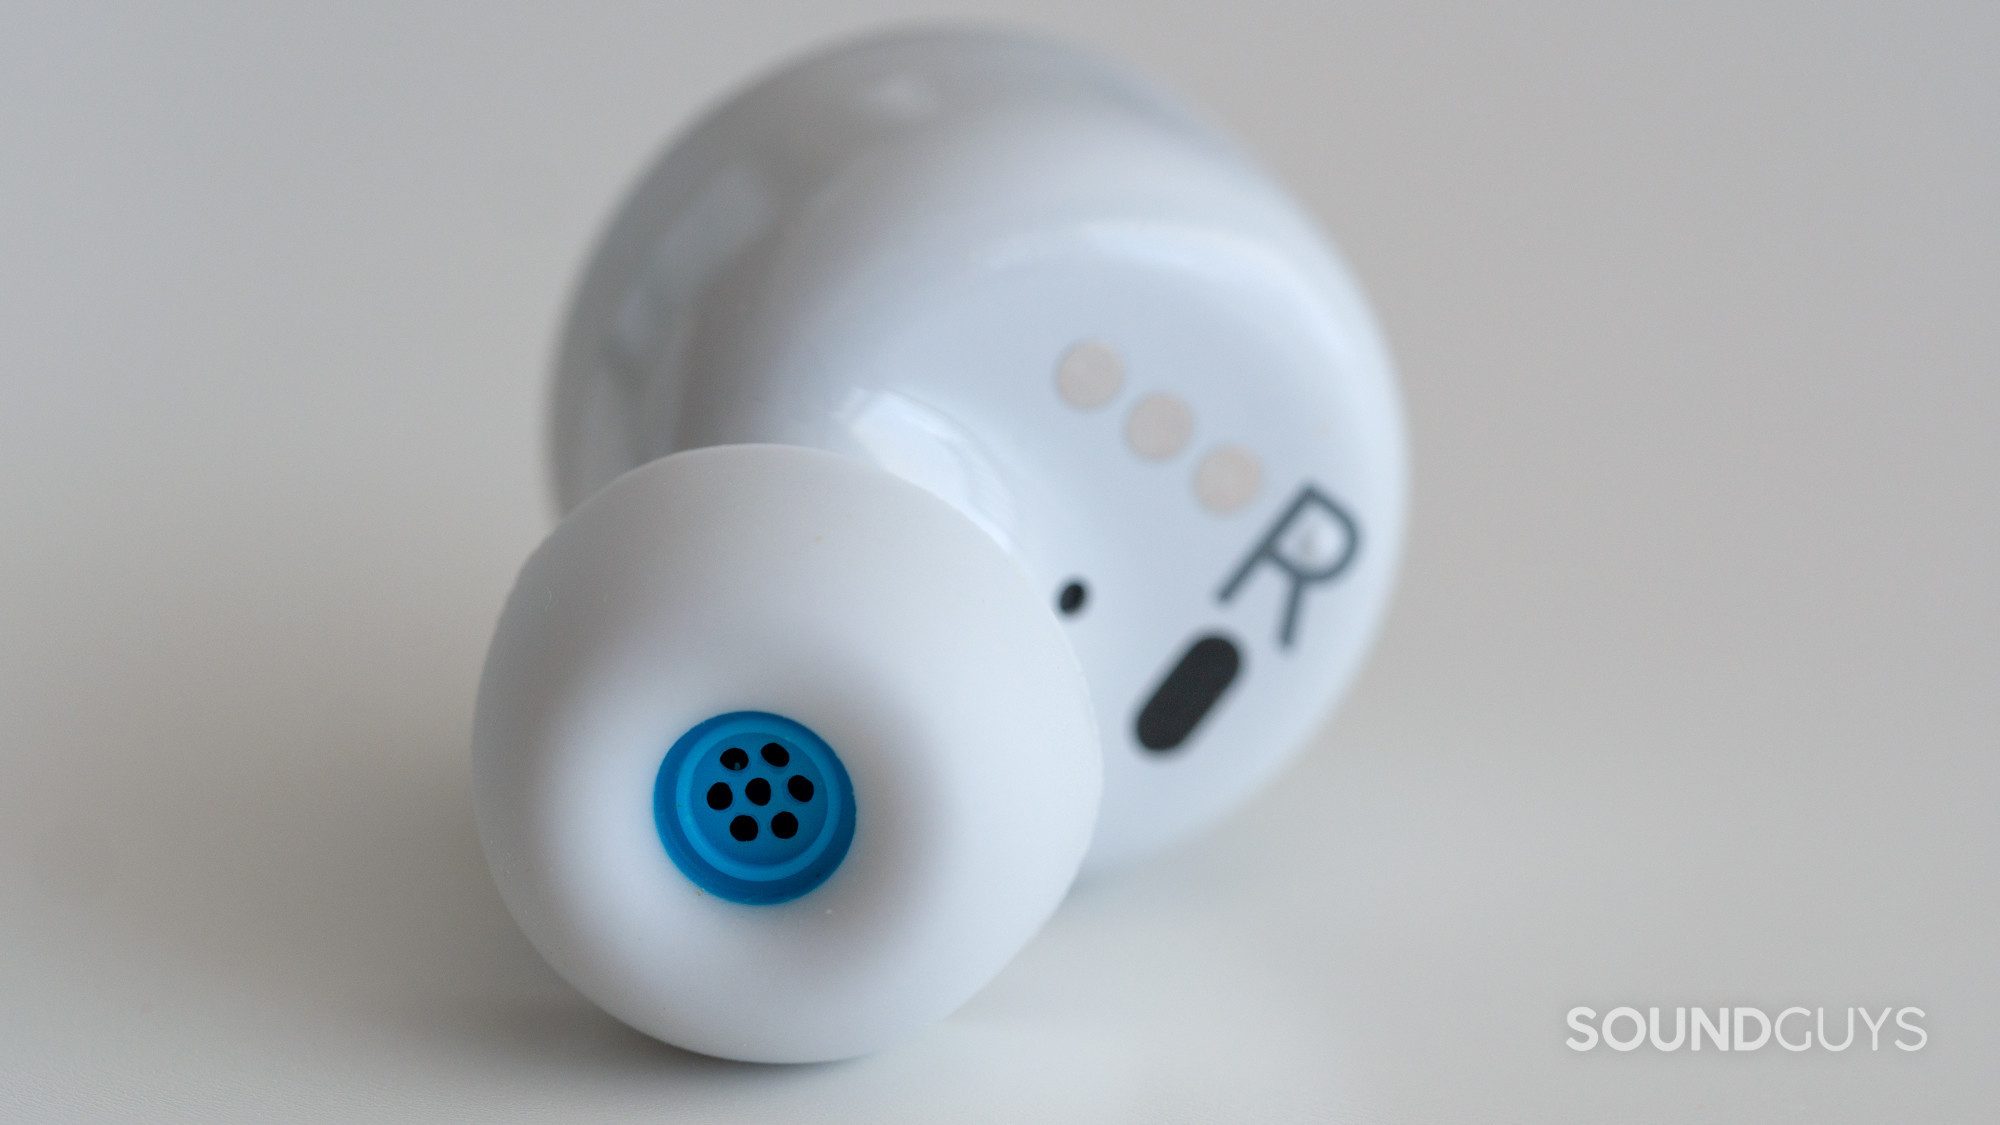 Echo Buds review: Best mix of value and features in